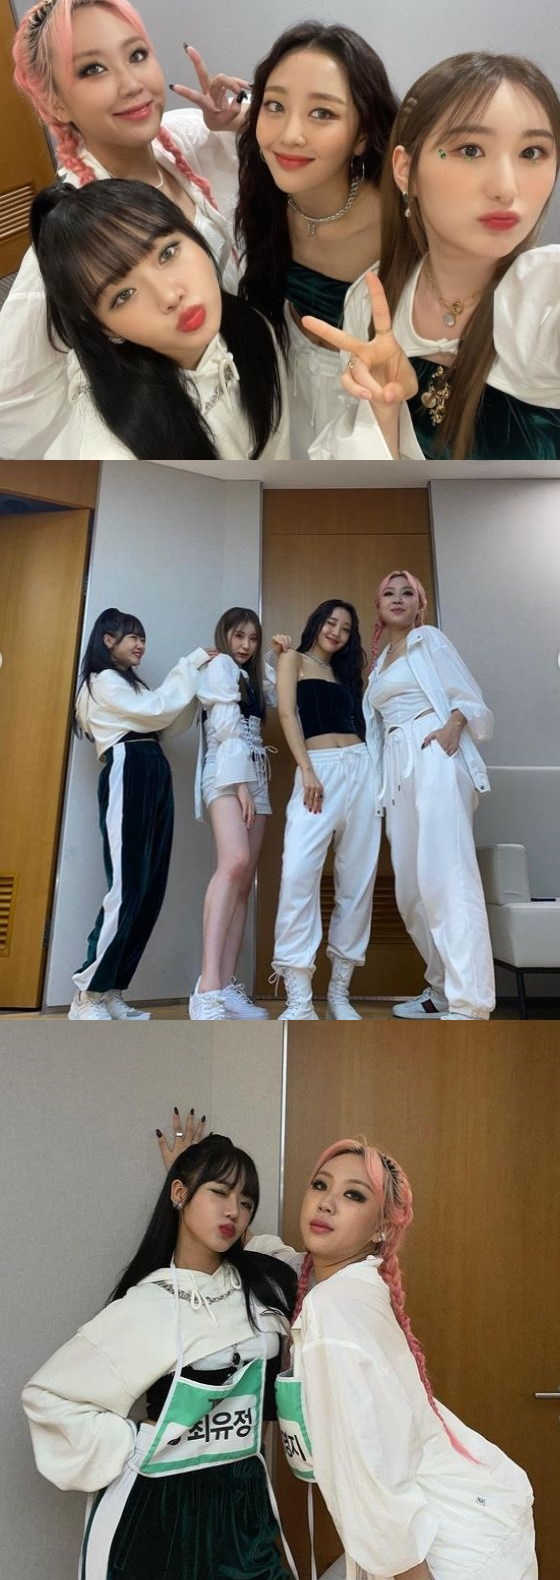 Choi Yoo-jung posted several photos on his 11th day with his article I enjoyed it hard through his instagram.In the photo, Choi Yoo-jung is taking various poses with Lee Chae-yeon, Eve, and Lee Young-ji and is showing off his youthful charm.The four of them had a stage for the wont team, which Lee Chae-yeon belongs to, in the Mnet entertainment program Street Woman Fighter broadcast on September 28th.On the other hand, Choi Yoo Jung is appearing with Kim Shin-young, Yui and Sunny in iHQ entertainment program Spy Sea Girls.